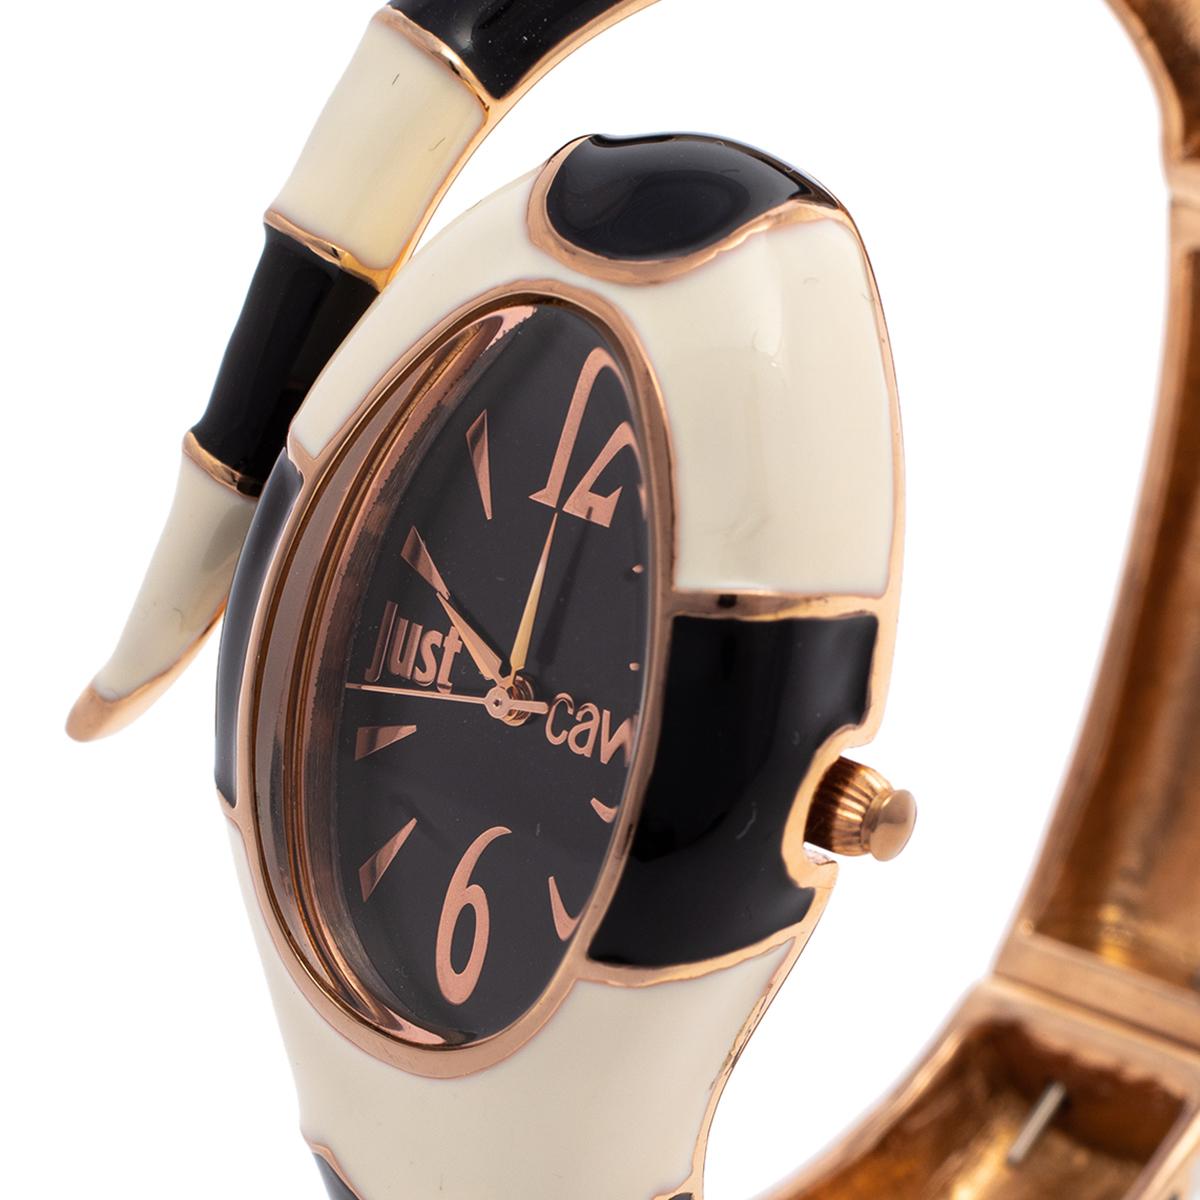 This Poison wristwatch from Just Cavalli is bold and beautiful. The enamel-coated watch sculpted using gold-tone metal in the shape of a serpent subtly wraps around your wrist featuring a dial on its head. The smooth black dial and 30 meters of